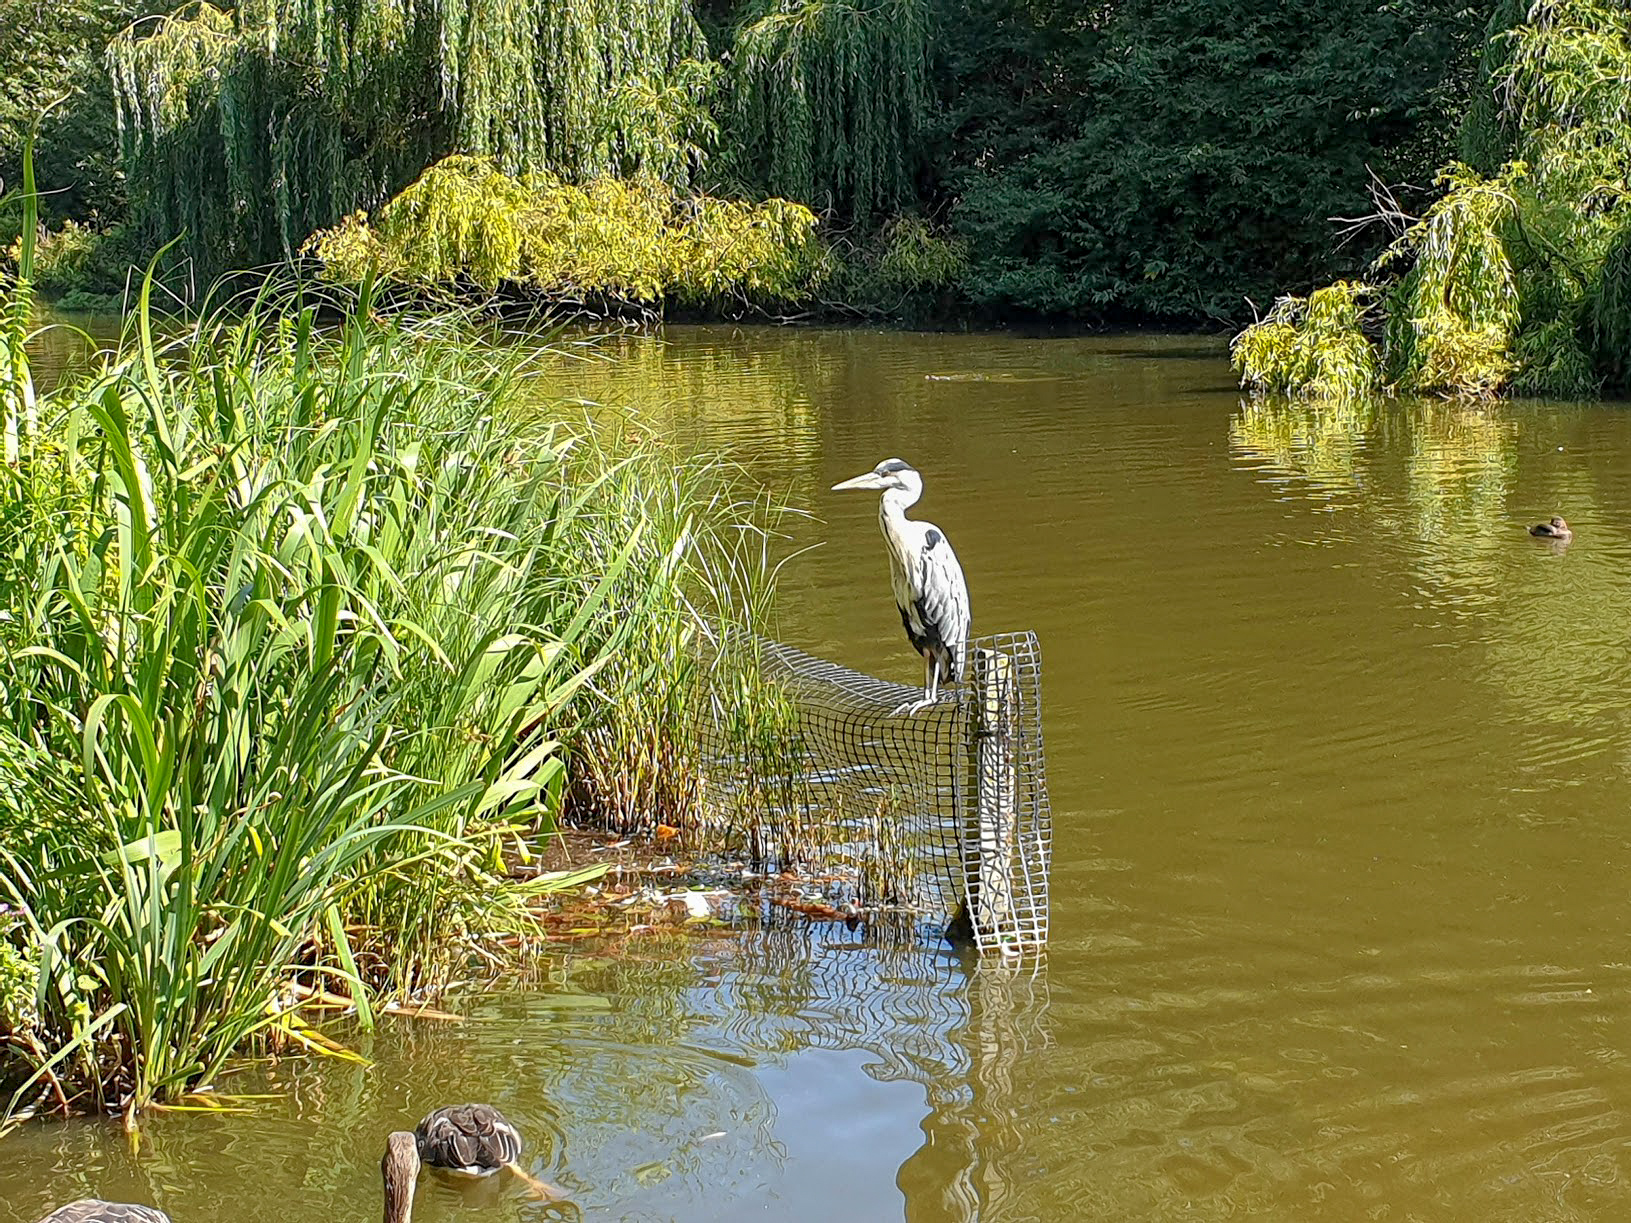 Heron sits by the lake in St James's Park